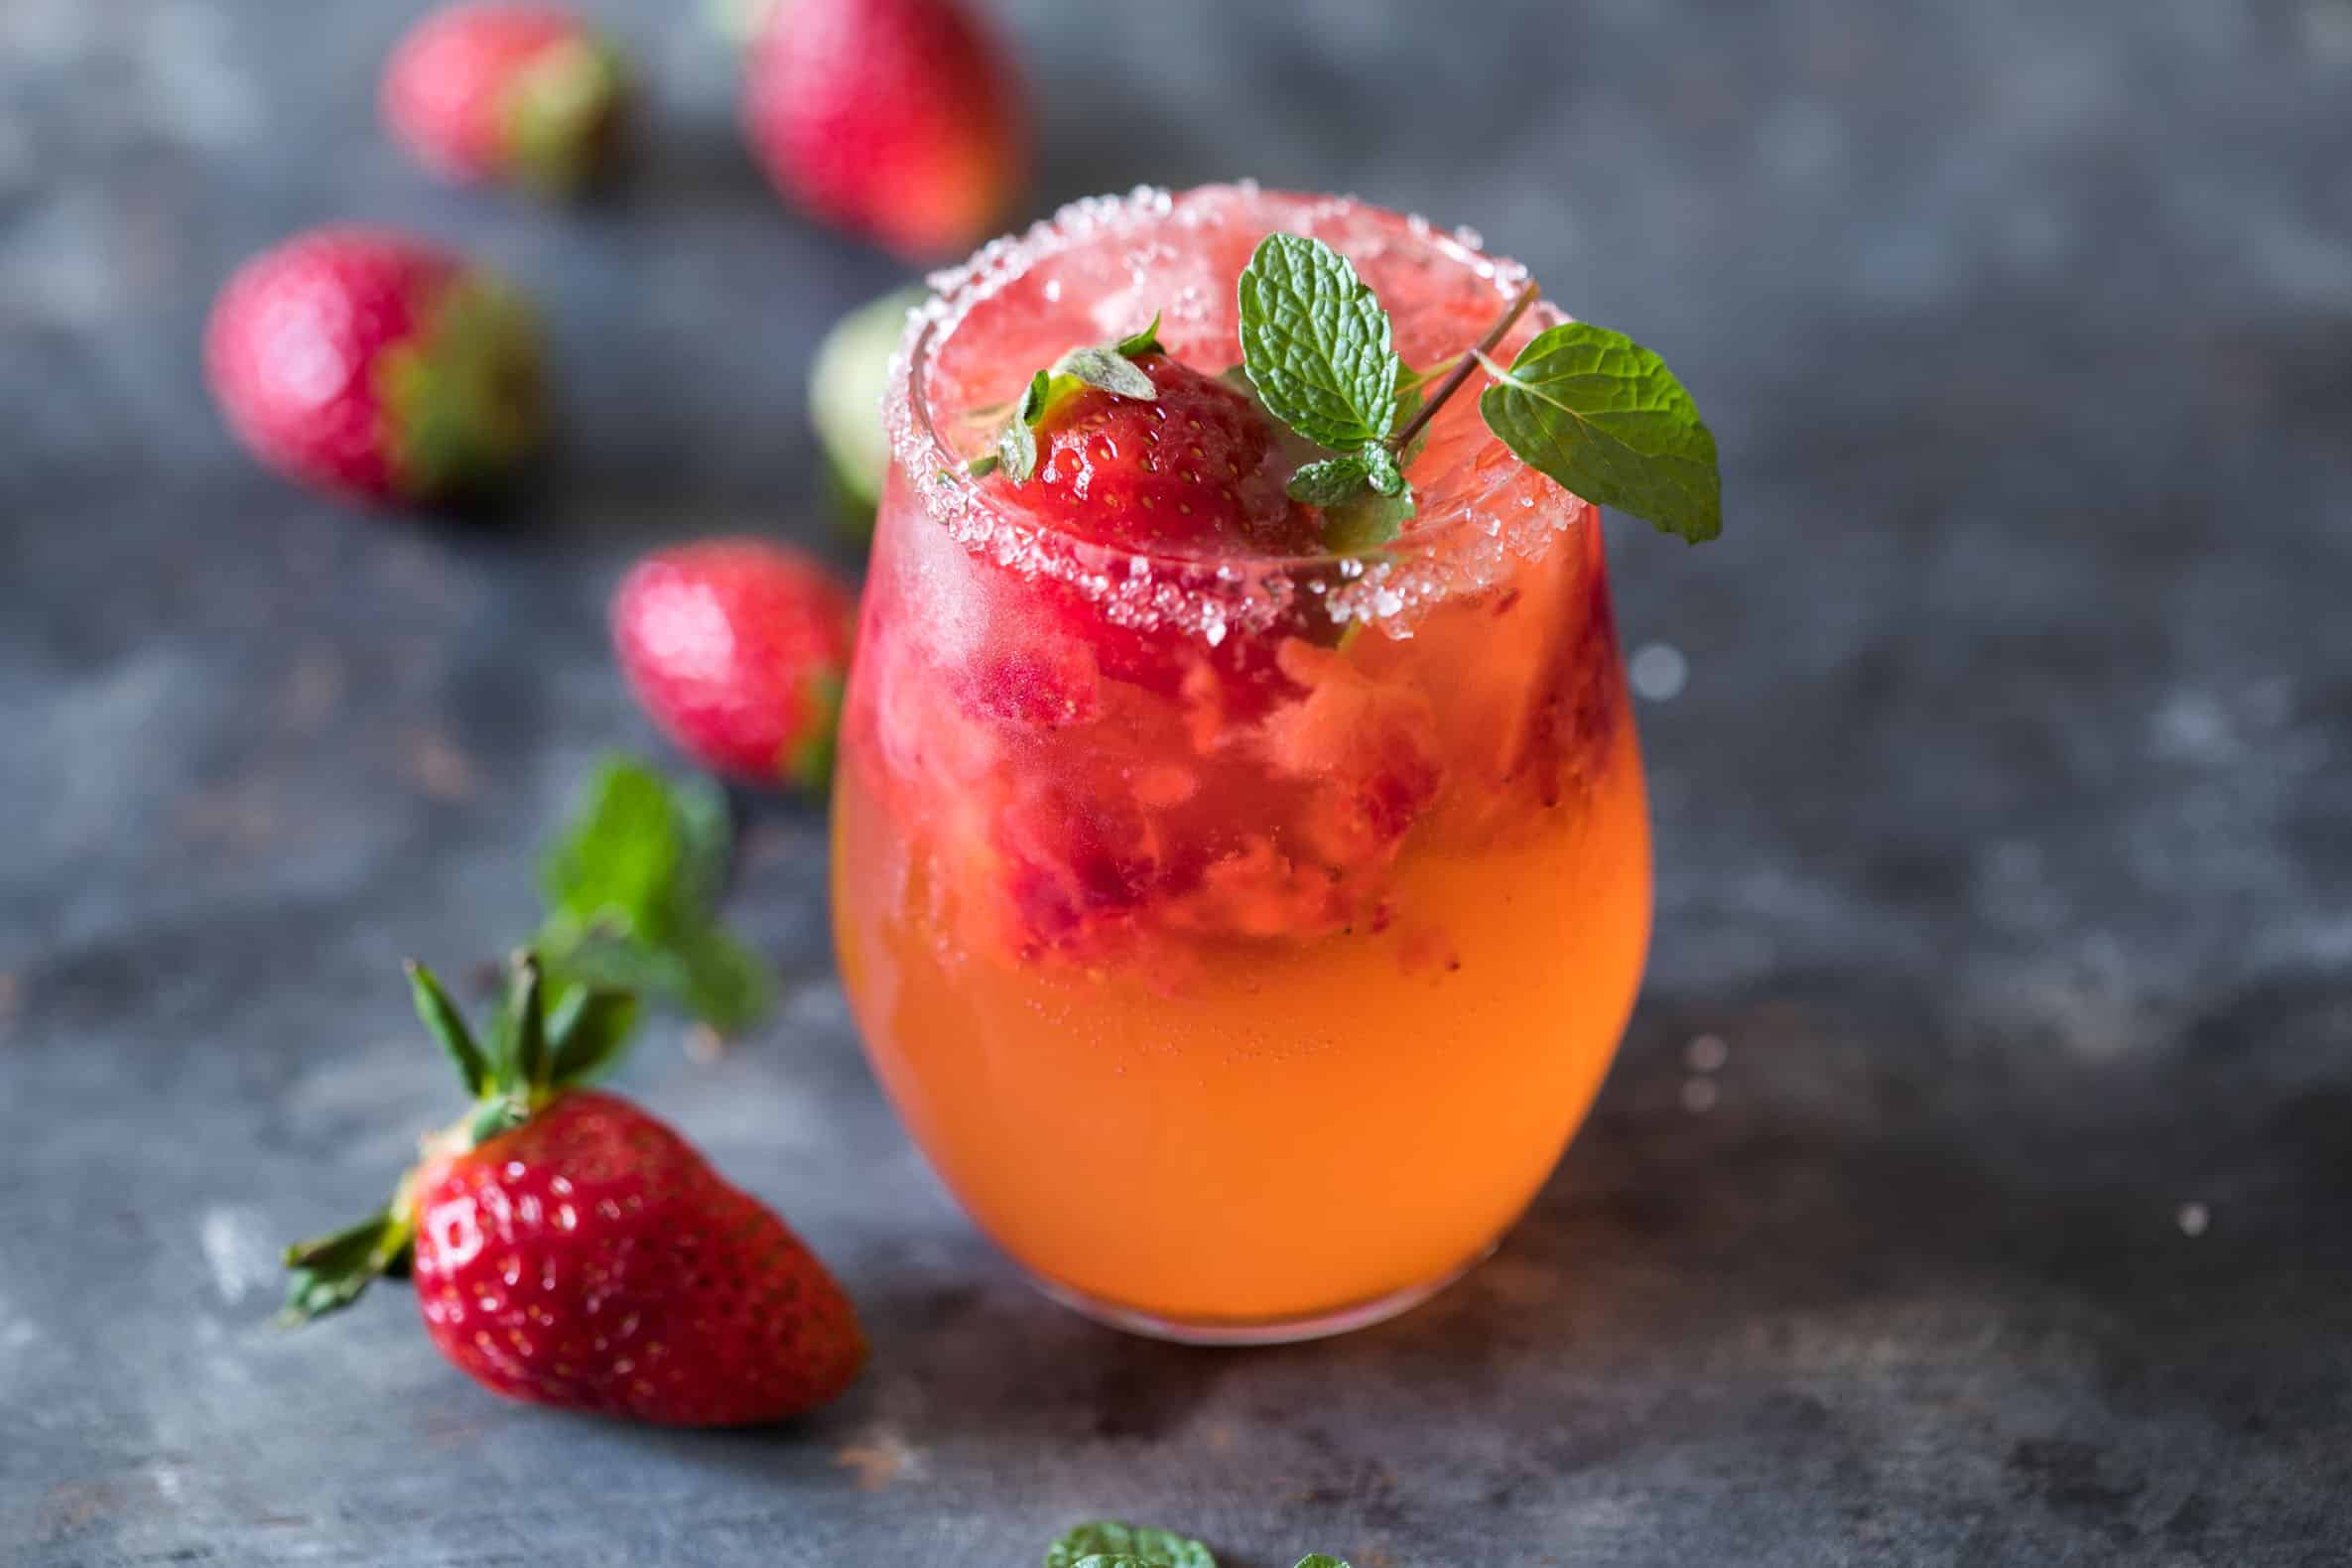 Mint Strawberry Moscow Mule is the perfect summer cocktail. Made with vodka and ginger beer it's super easy and our go to drink these days!